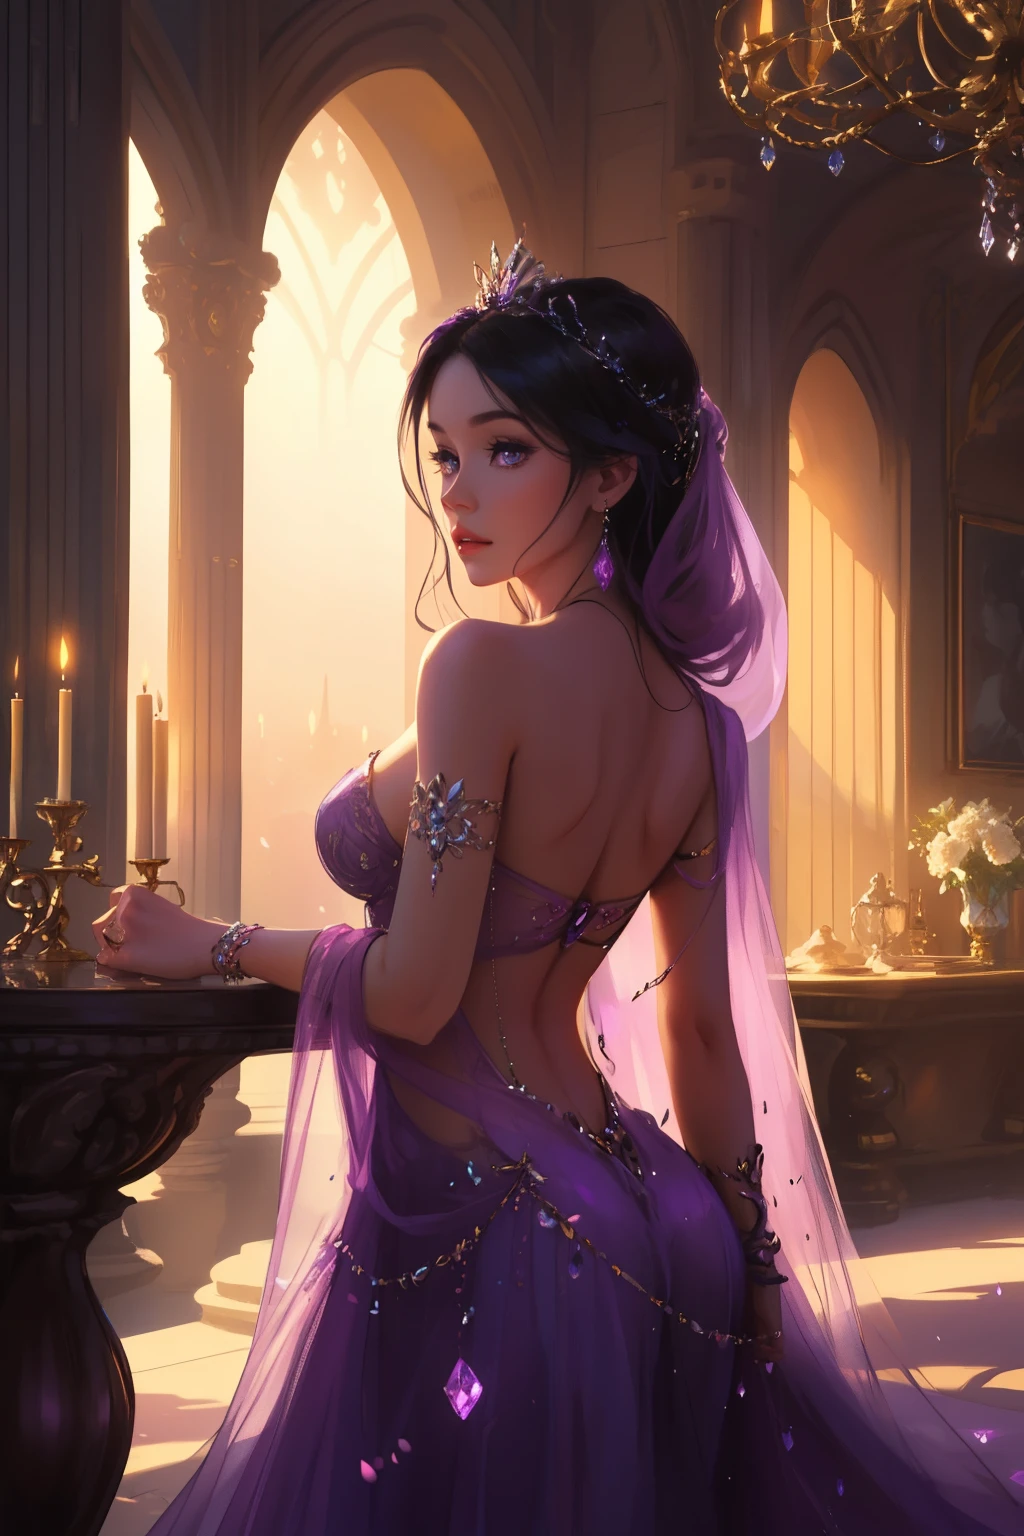 Fantasy, Sophisticated, lots of colors, High detail, Soft lighting, luxurious furnishings, Delicate flowing fairy dress, detailed jewelry, Unearthly atmosphere, Elegant pose, Graceful curves, Flowing and fluffy hair, Bright and transparent purple eyes, Delicate floral decoration, dazzling set of shiny crystal accessories, mysterious and dreamy atmosphere, hd